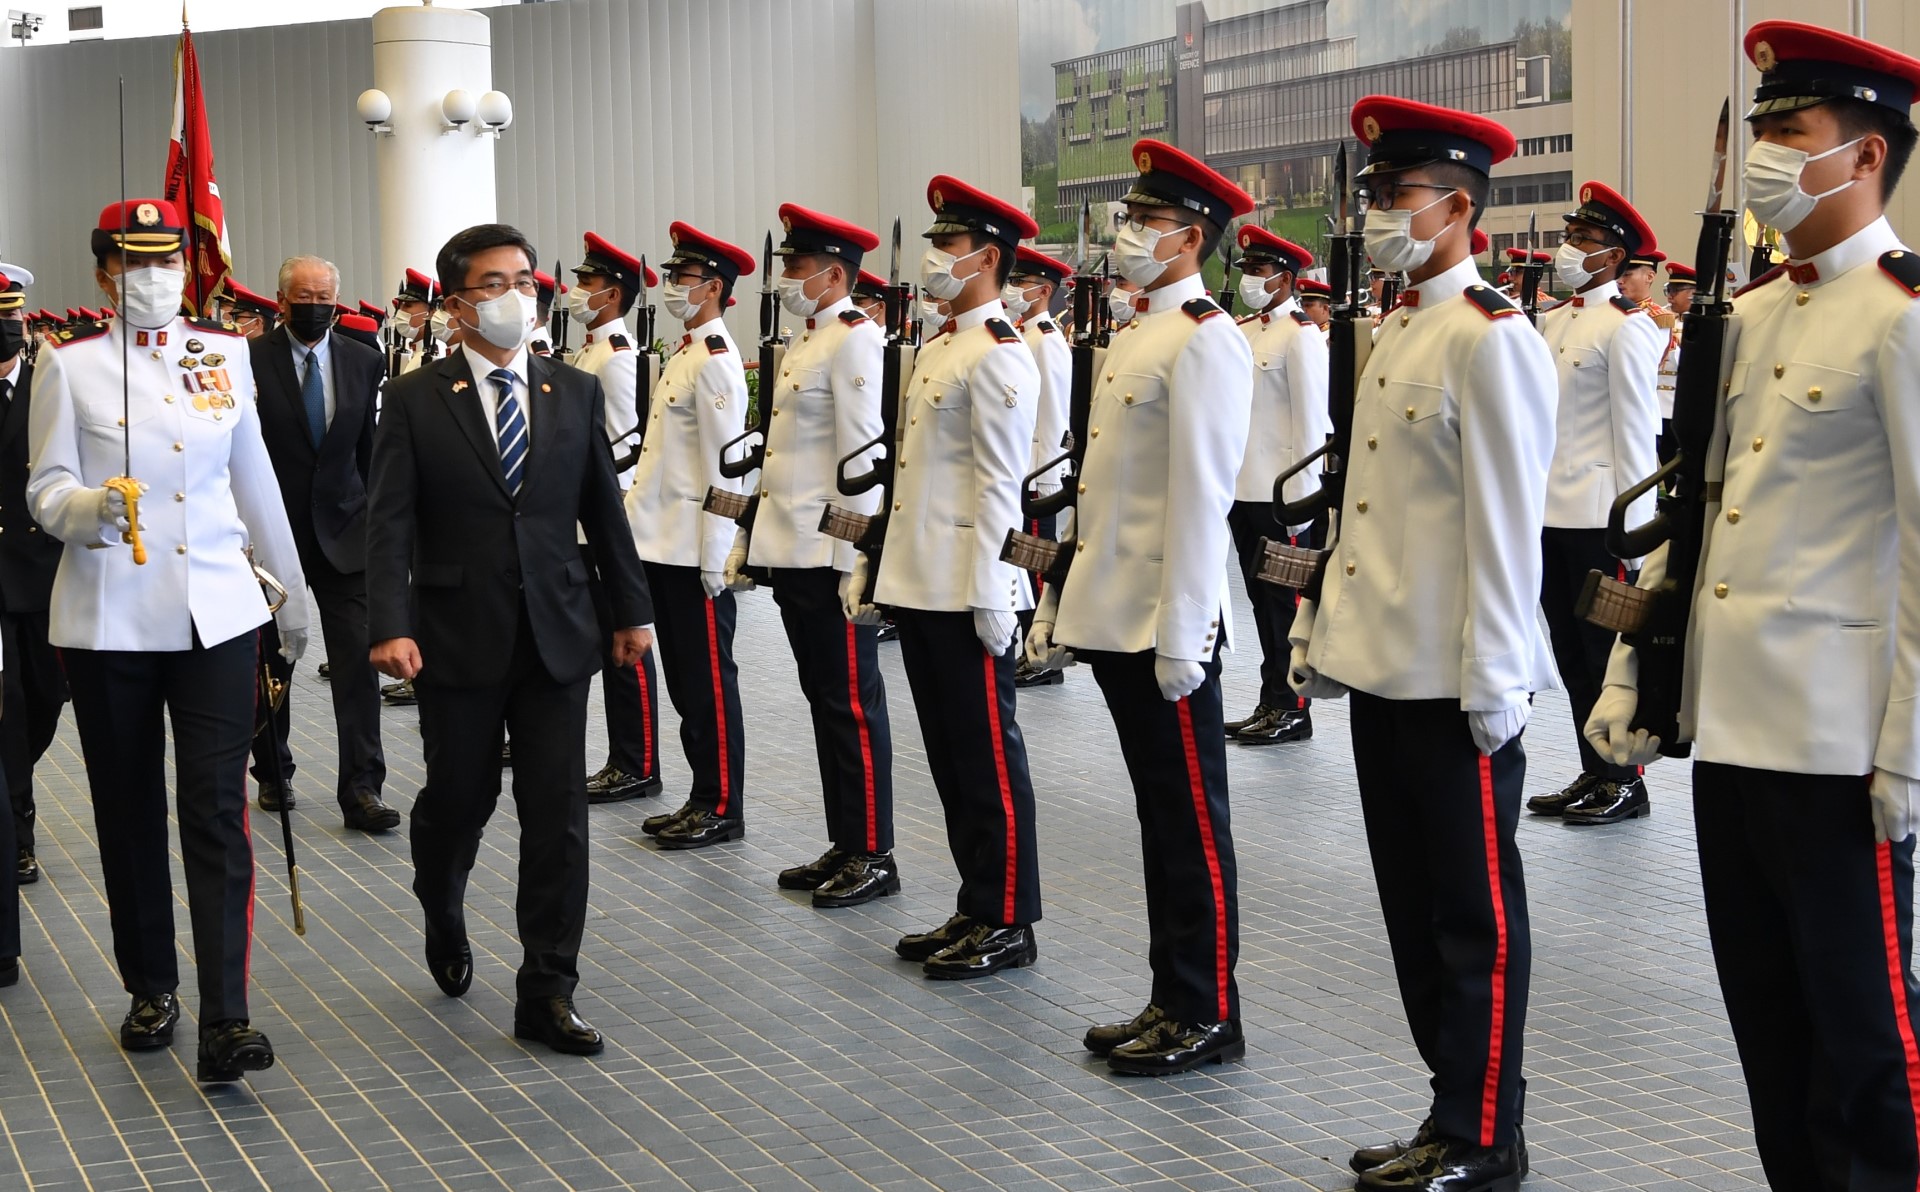 Republic of Korea Minister of National Defense Suh Wook inspecting the Guard of Honour at the Ministry of Defence (MINDEF).